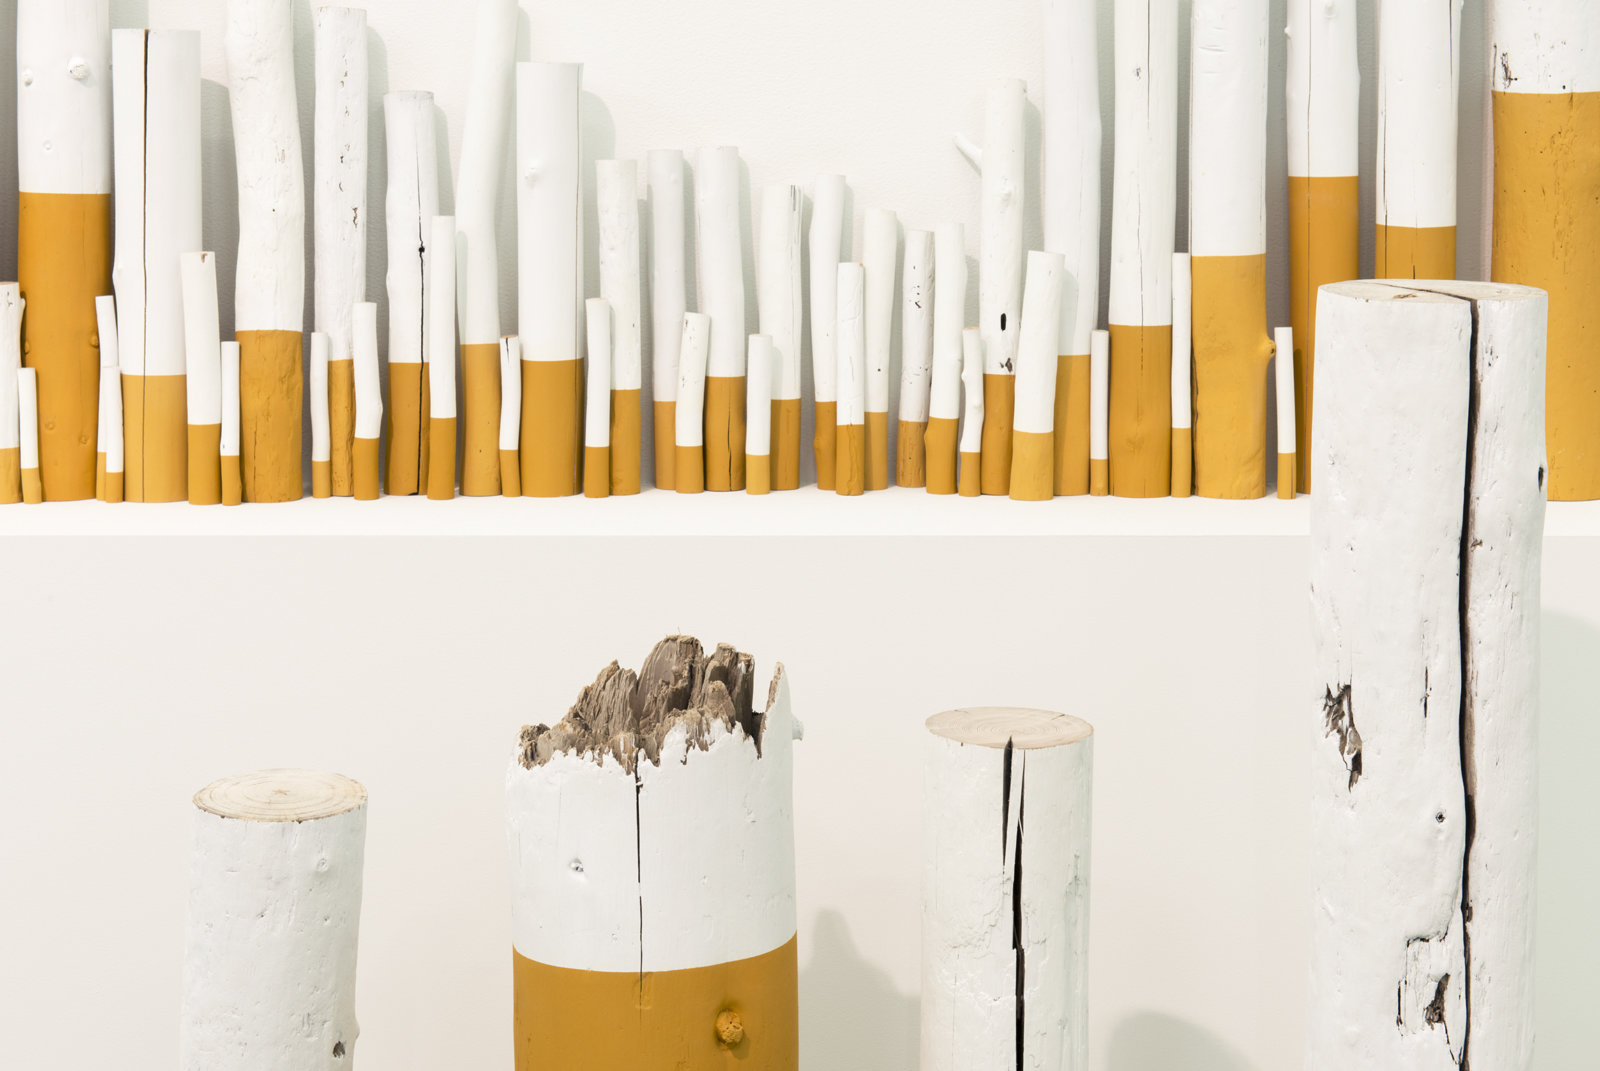 Liz Magor, The Rules (detail), 2012, wood, paint, 38 x 180 x 10 in. (97 x 457 x 25 cm)